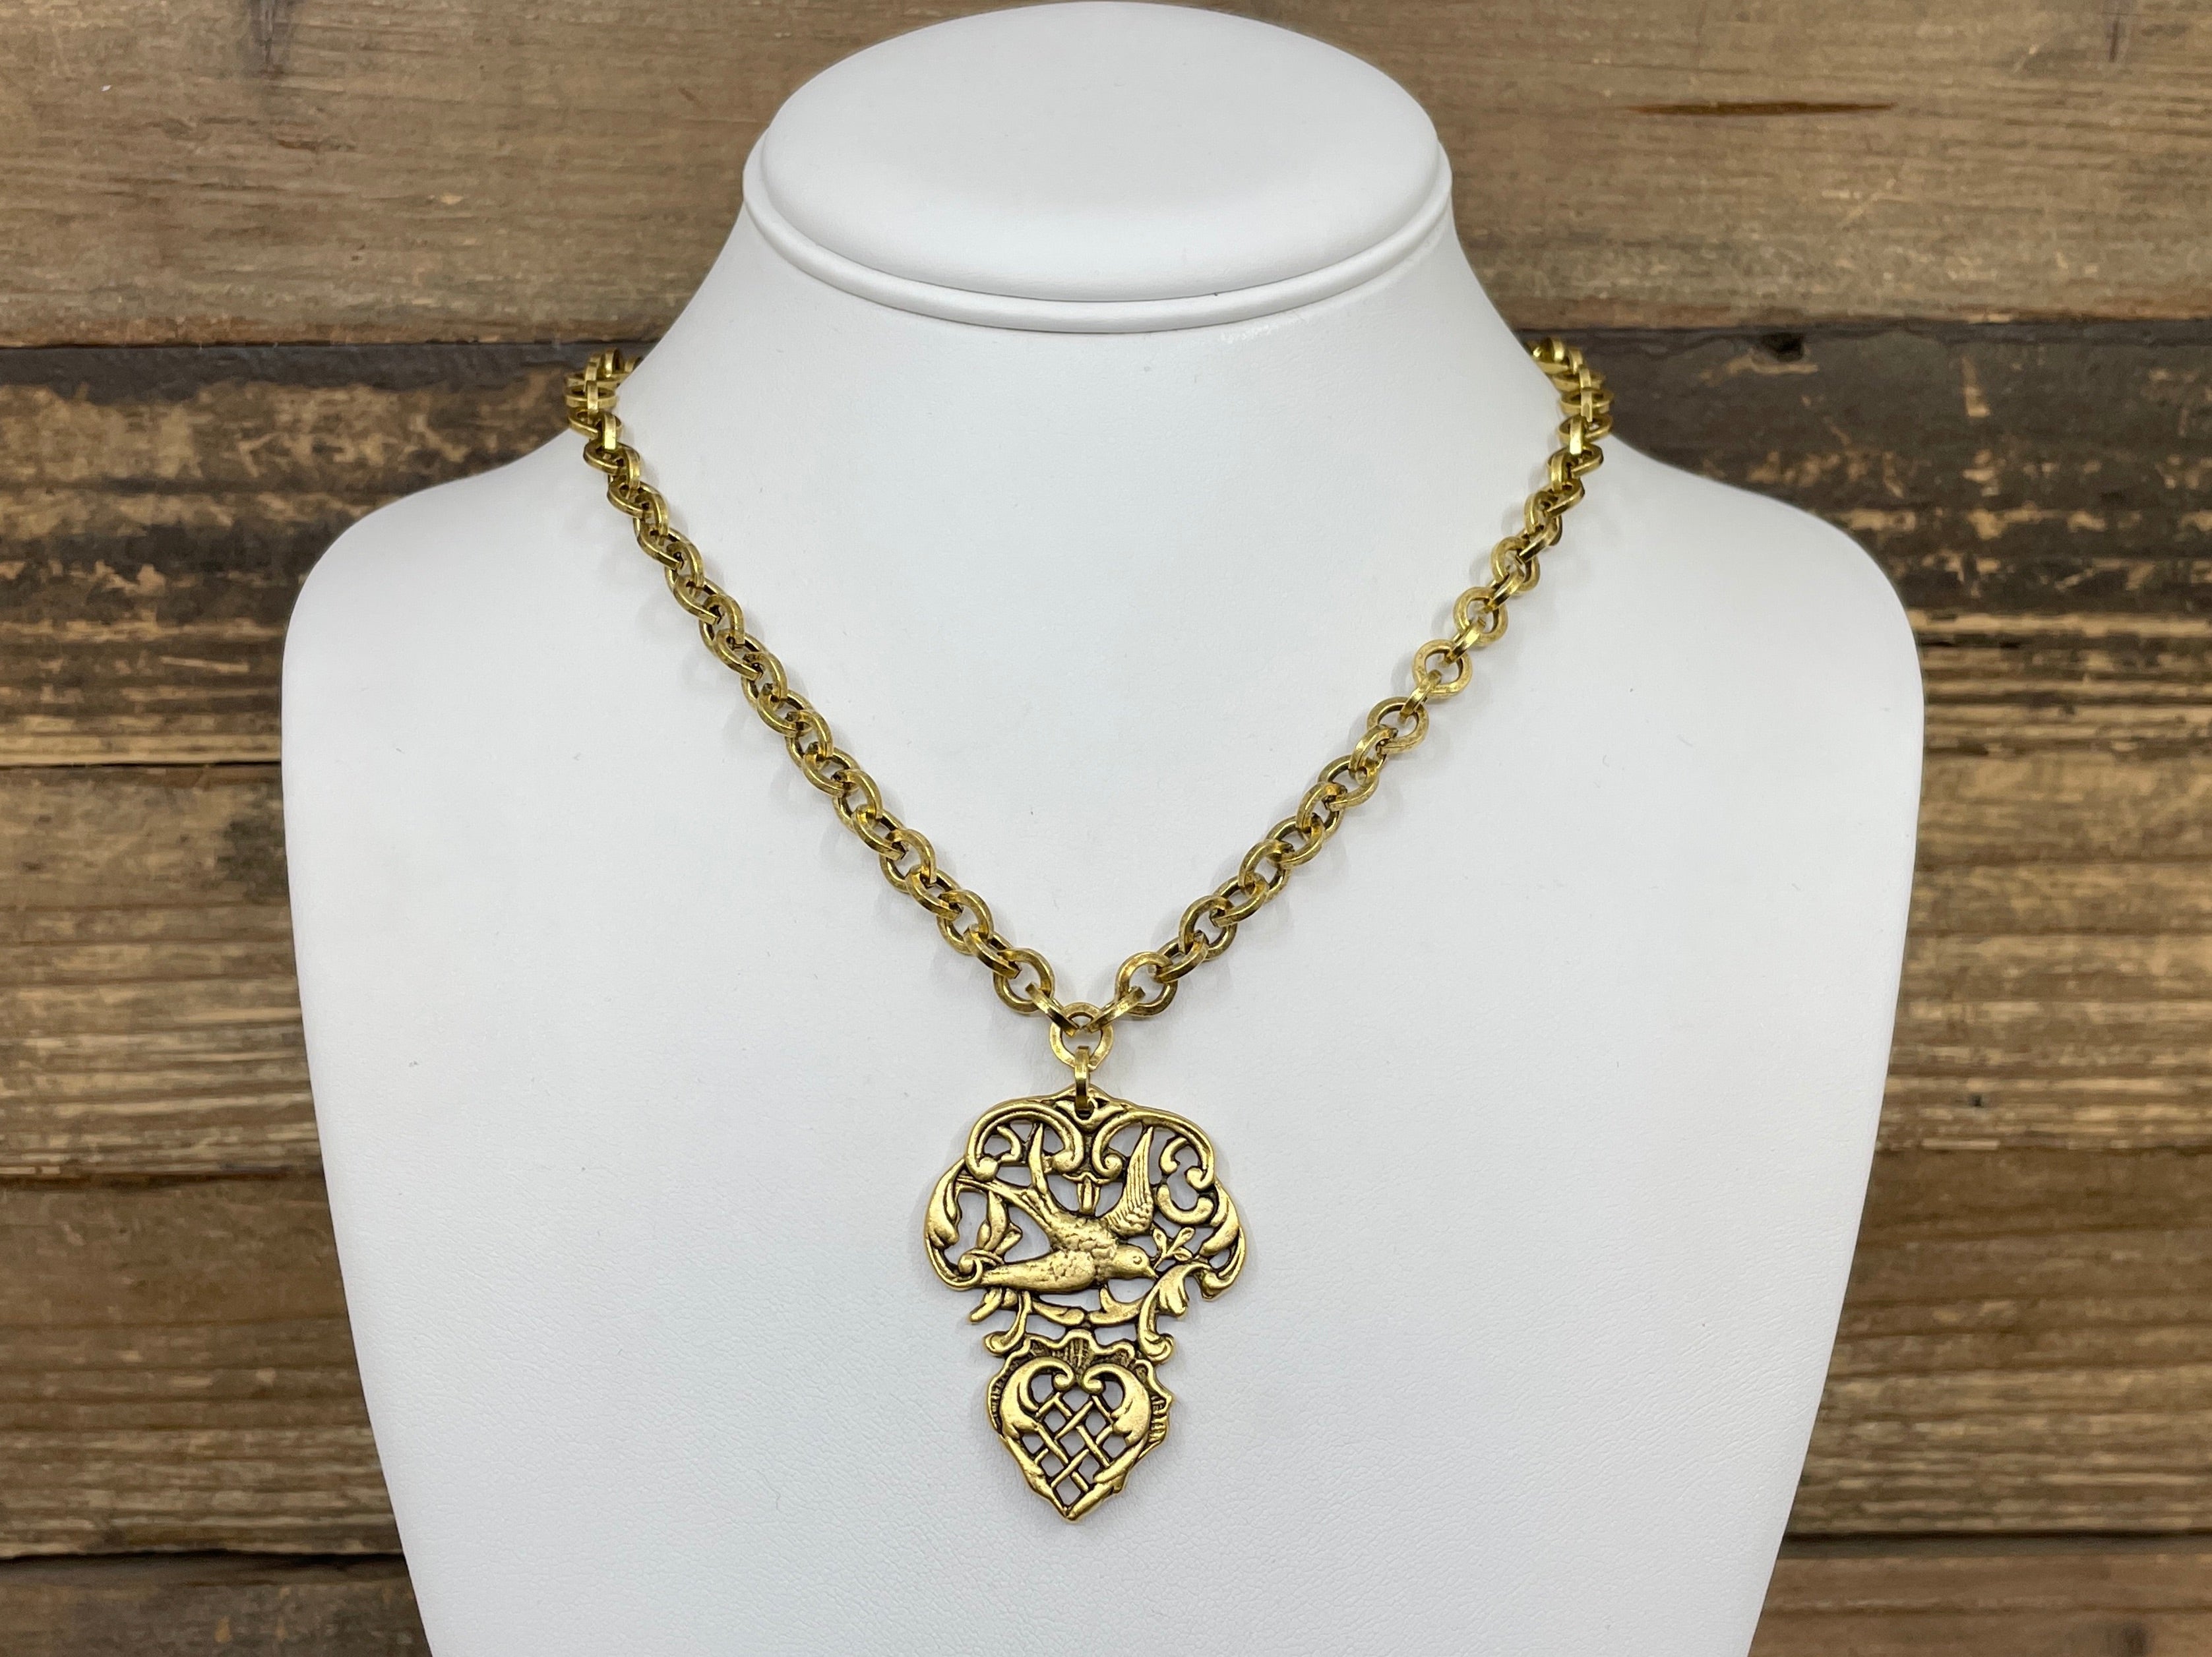 Gold Plated Chain with Vintage Bird Pendant & Pearl 20